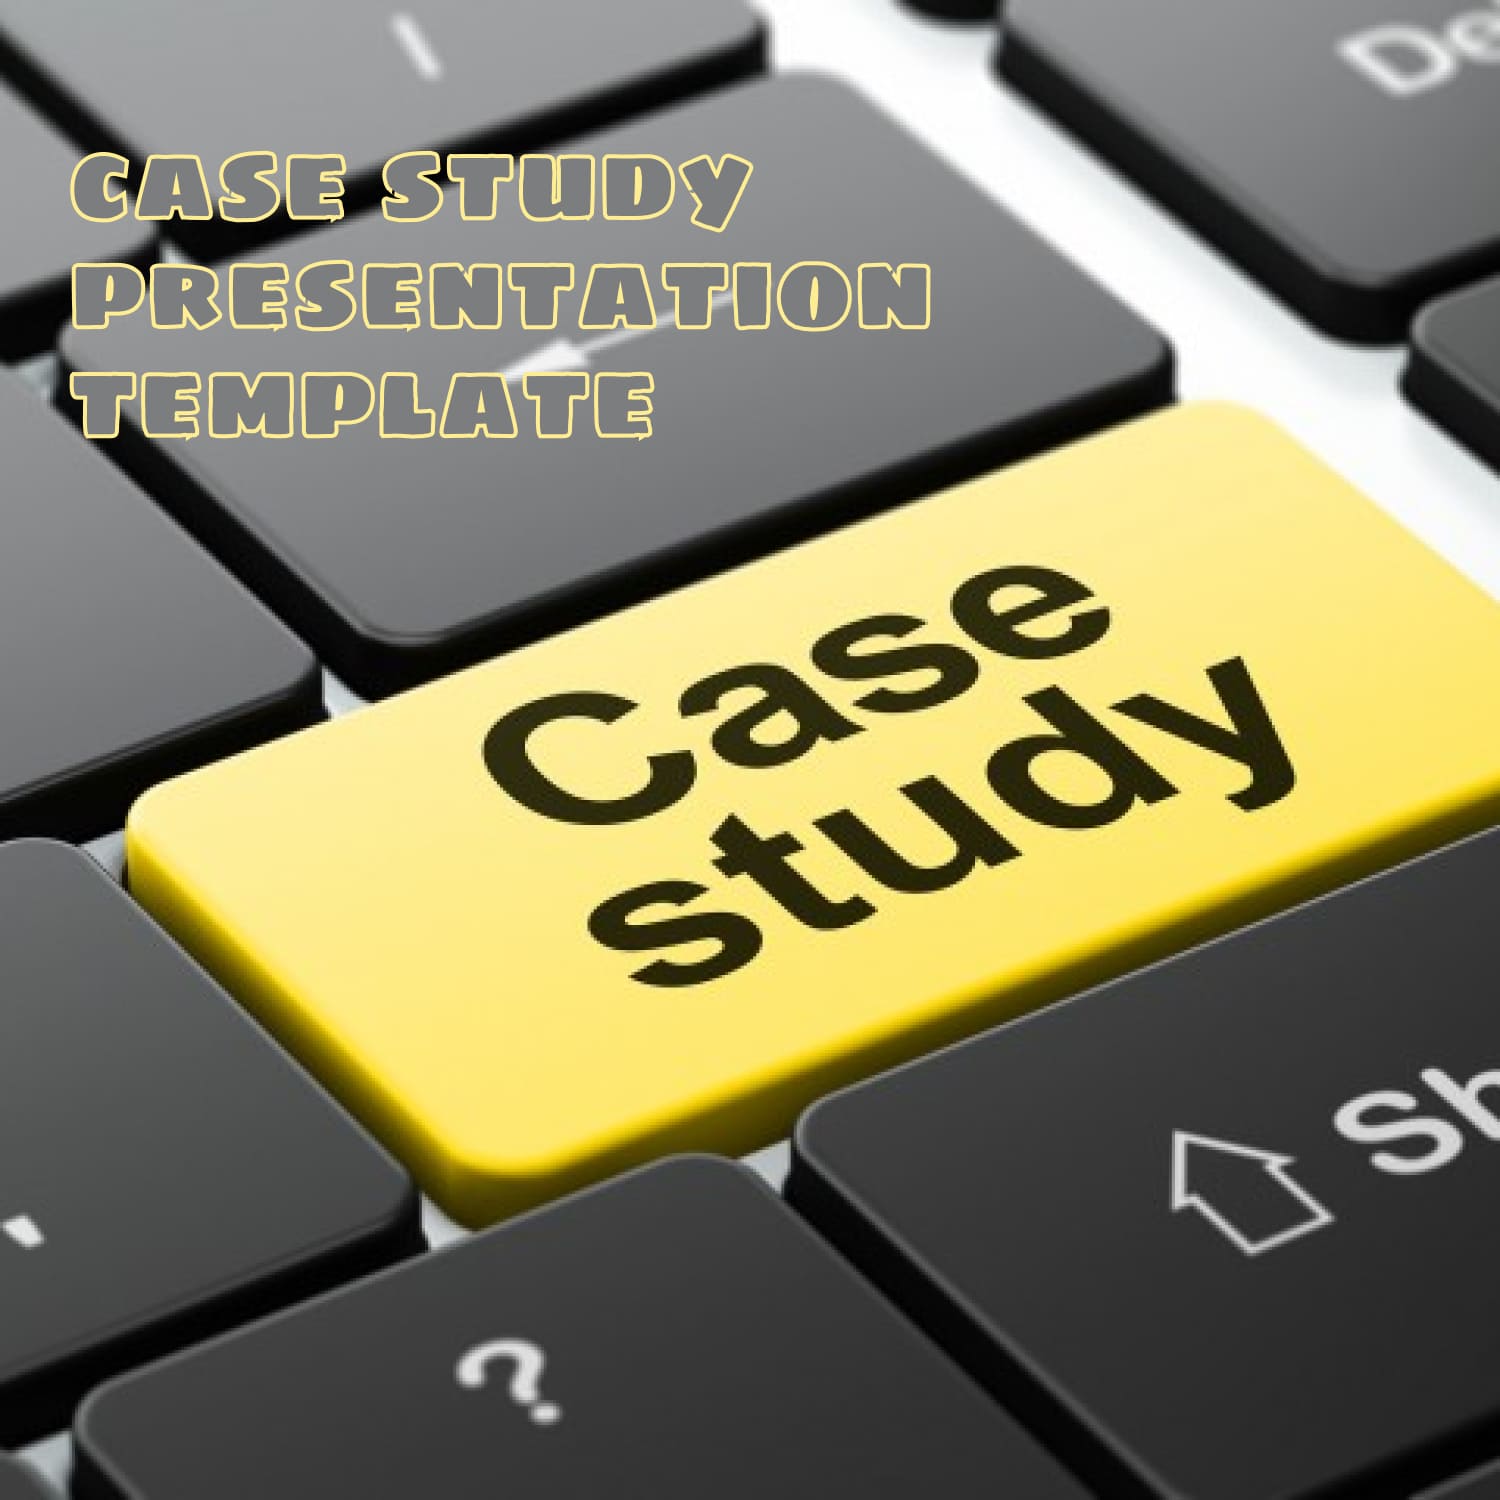 Case study powerpoint presentation - main image preview.